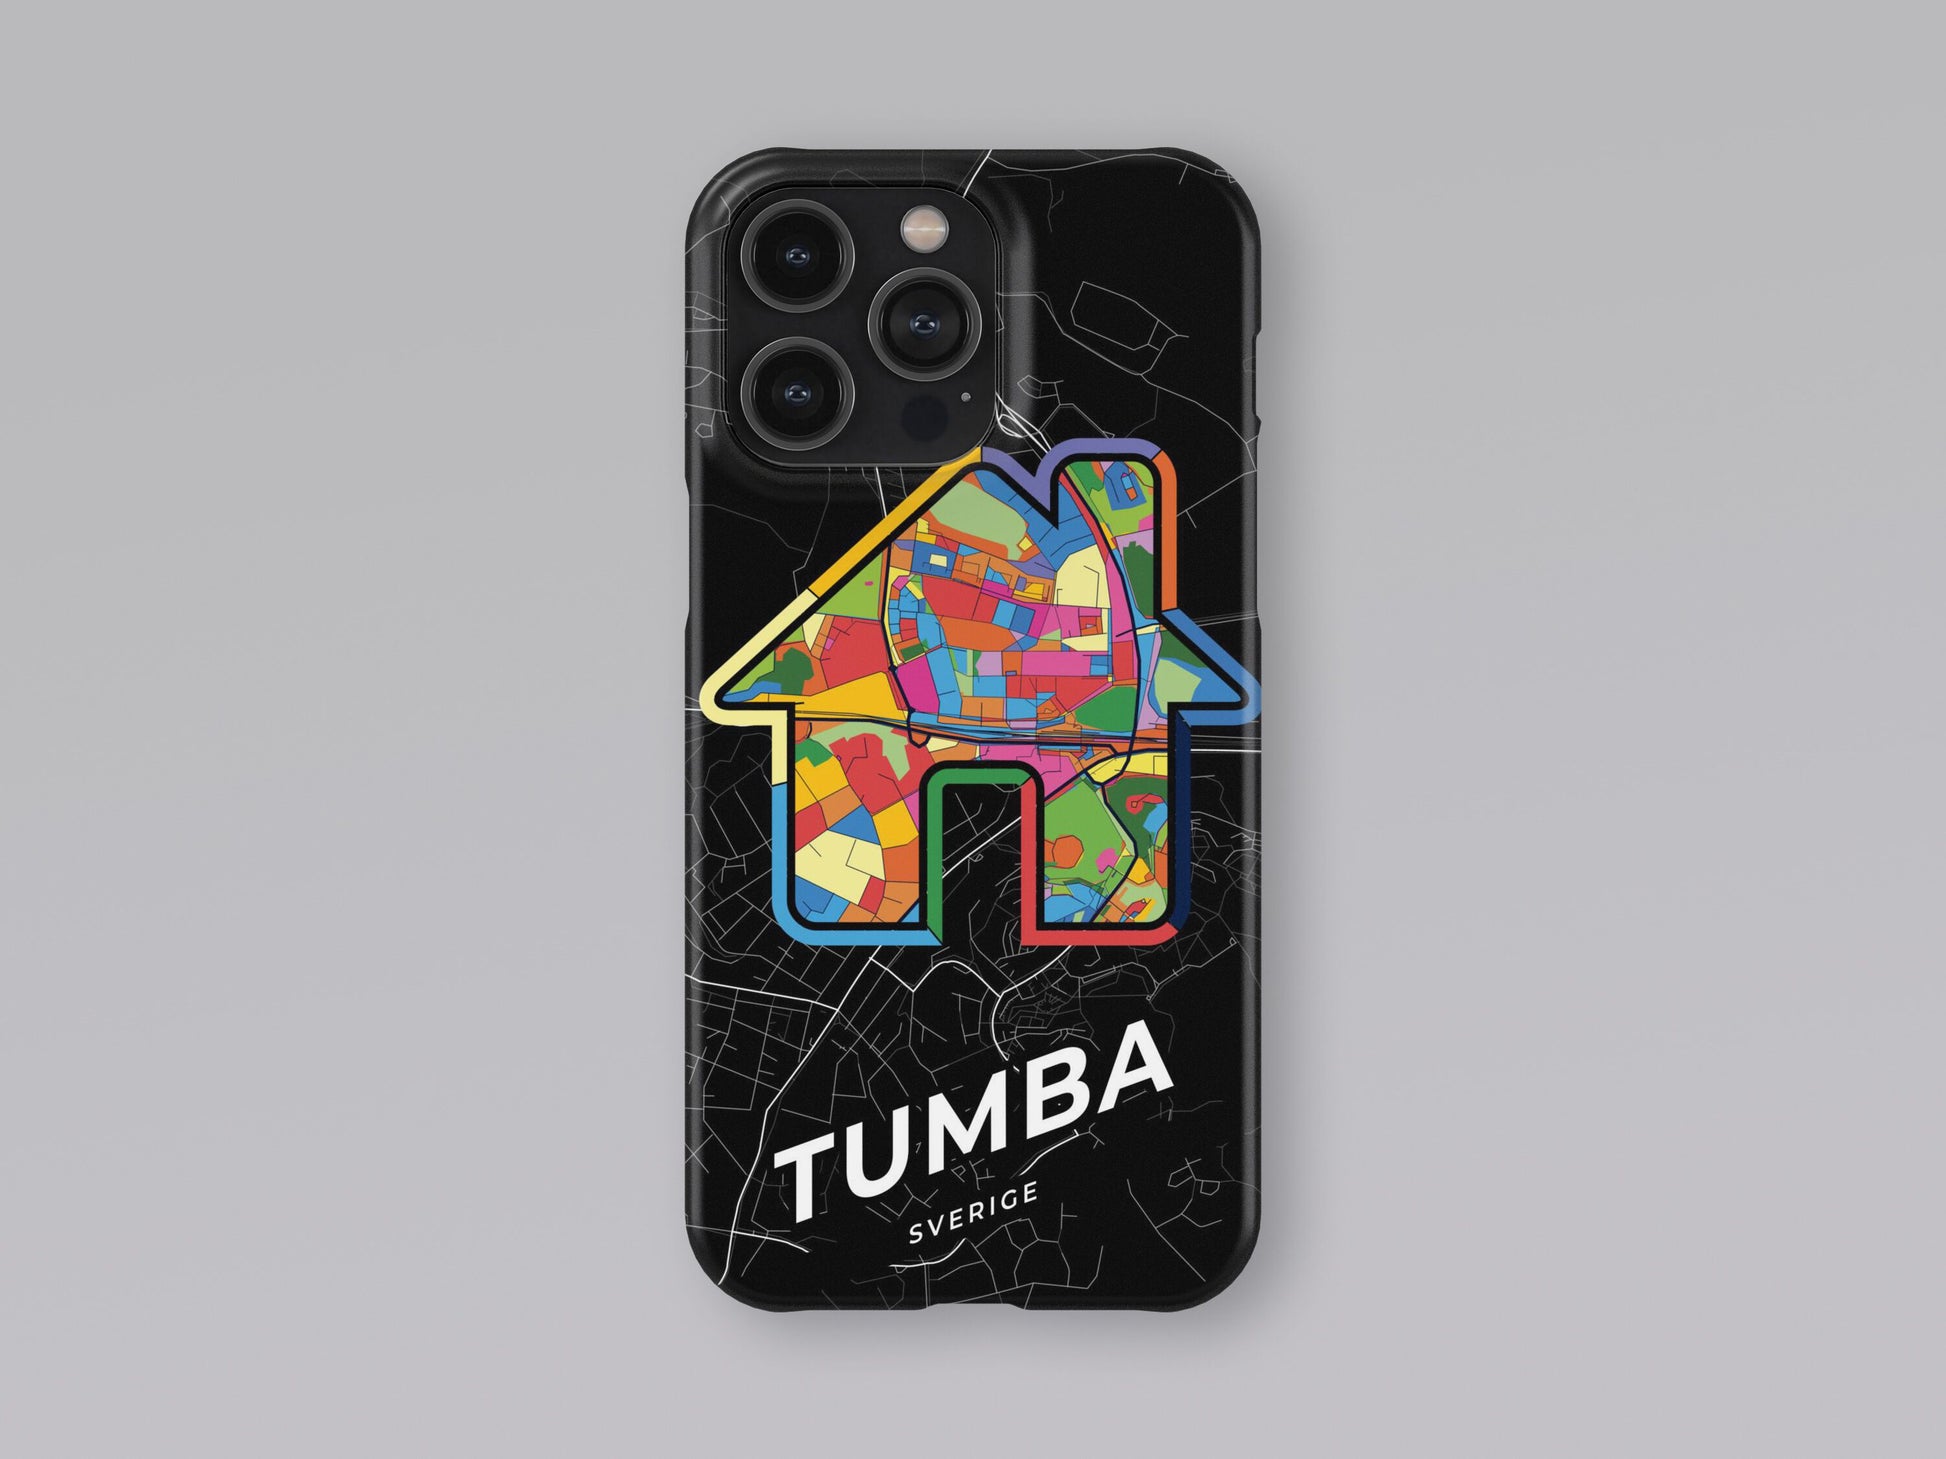 Tumba Sweden slim phone case with colorful icon 3